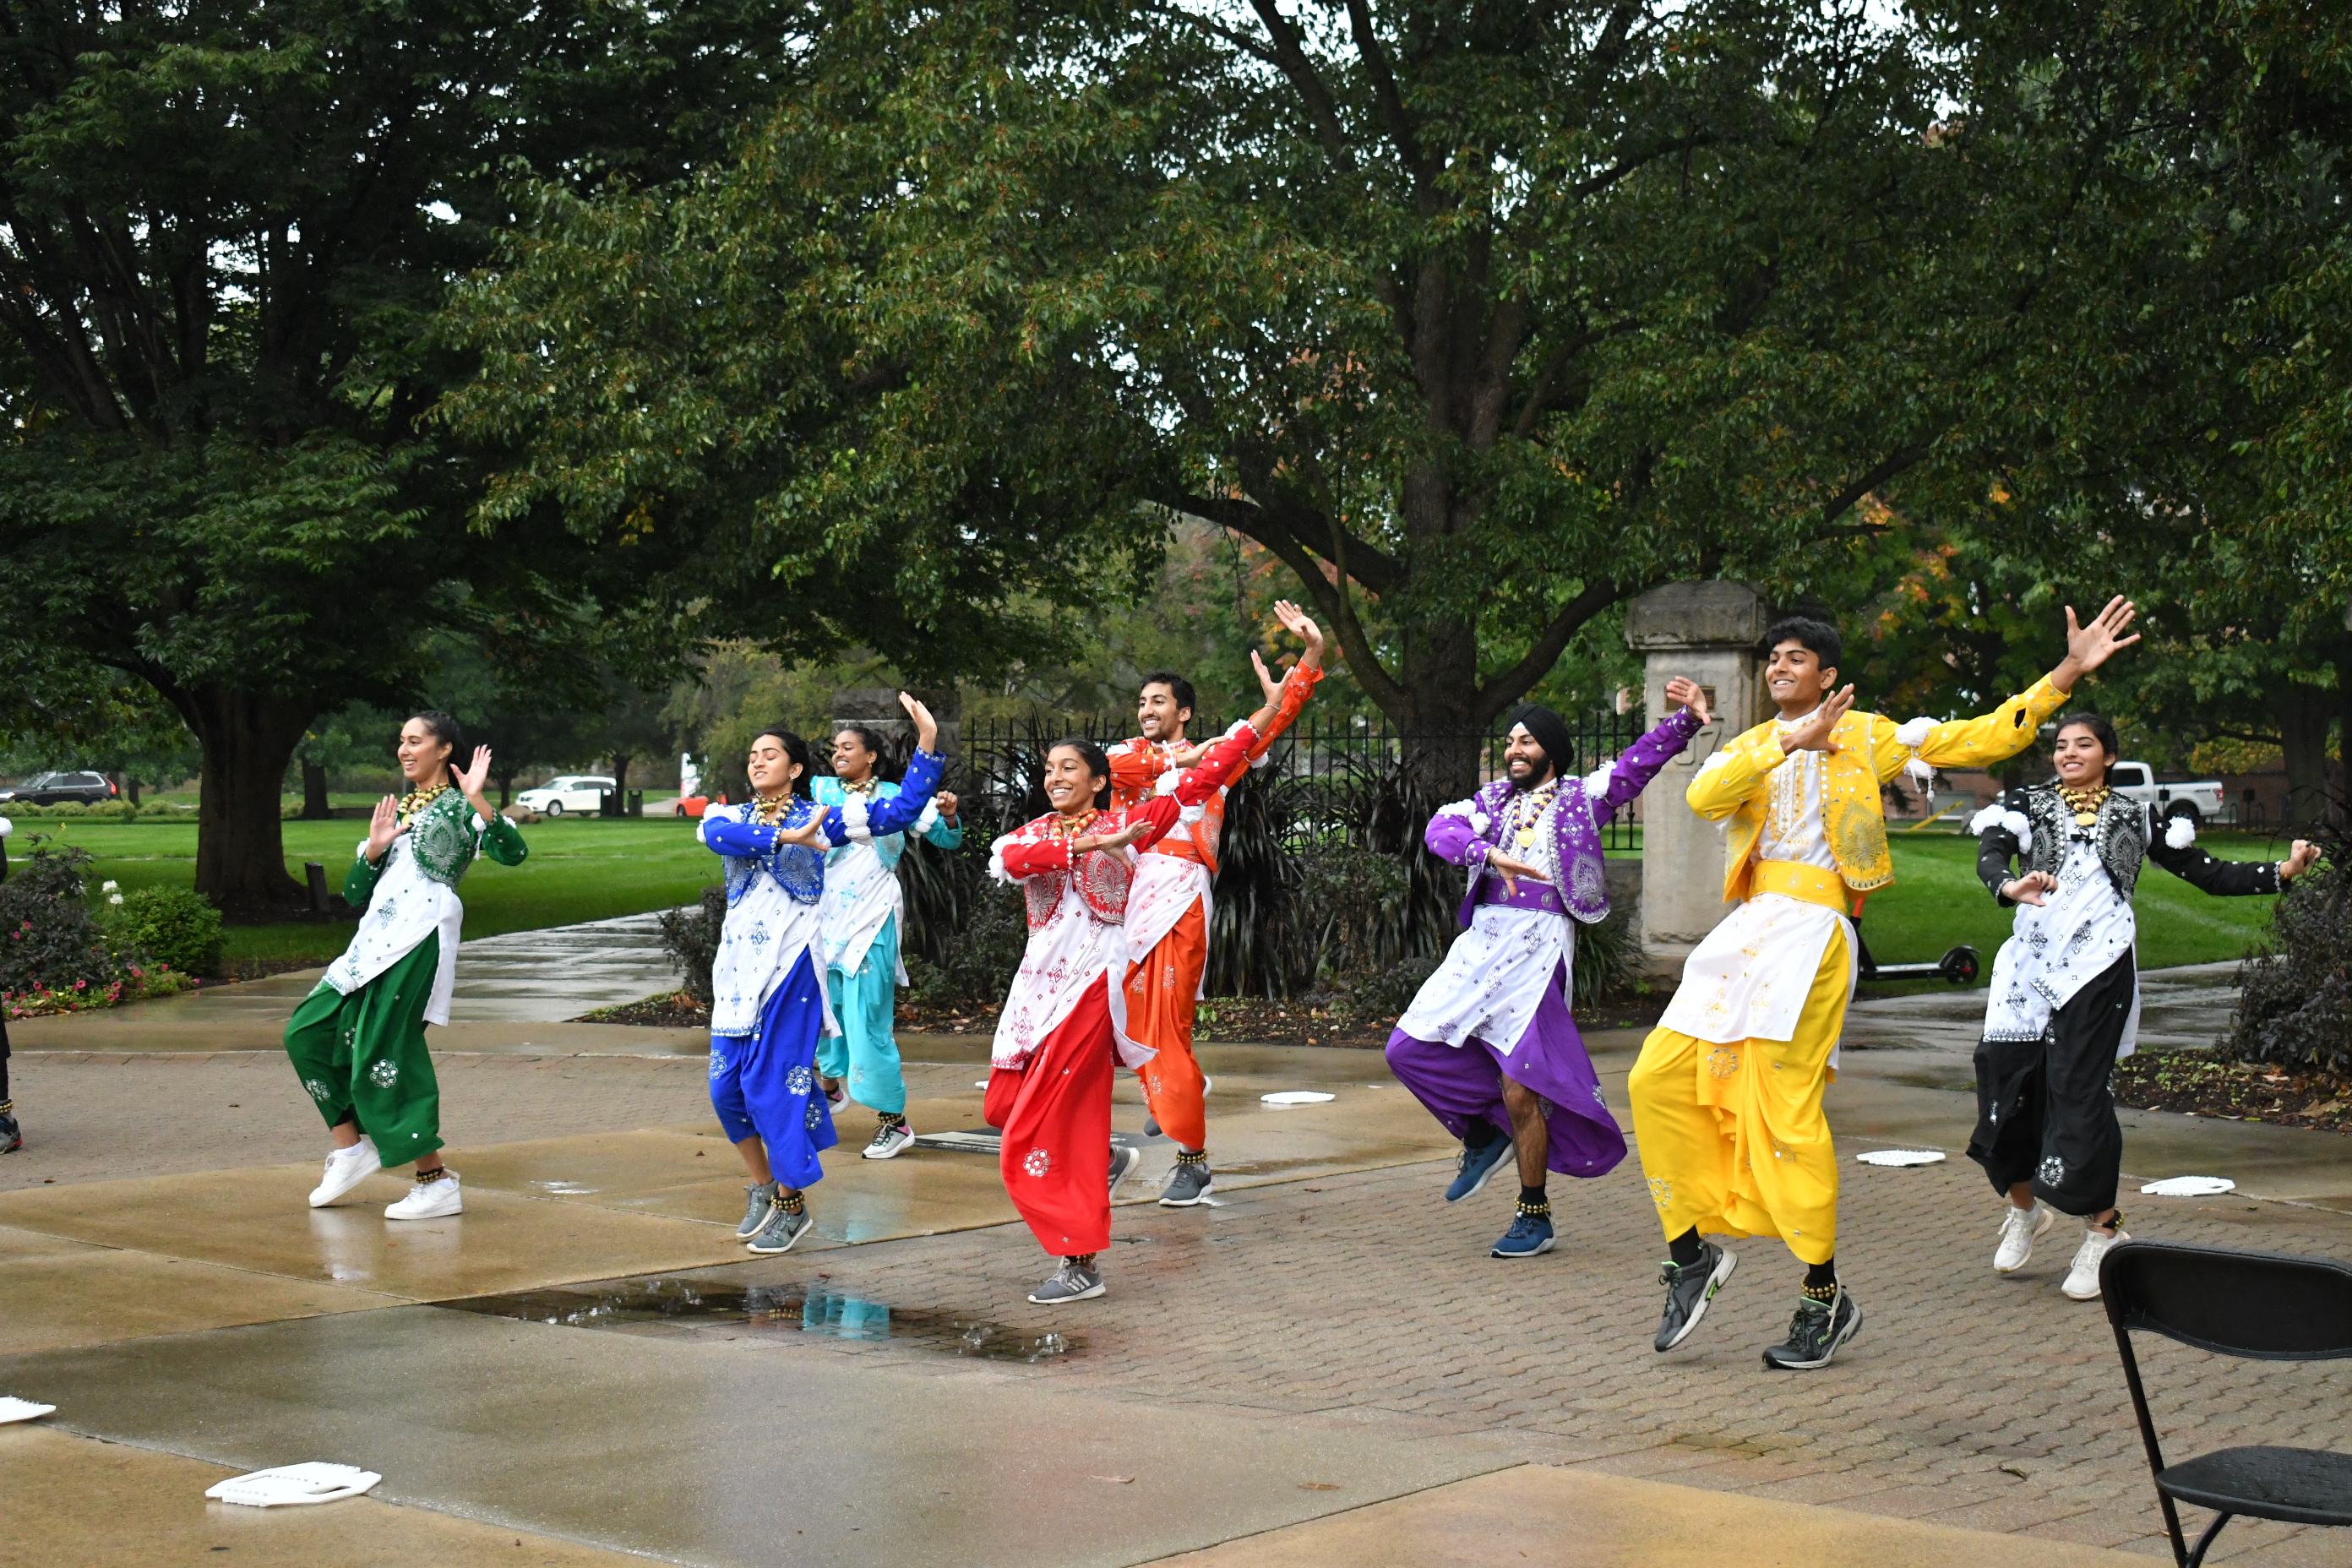 Remote workers who relocate to Purdue University's campus might catch a performance from the Boiler Bhangra competitive dance team. (Photo, Purdue University Marketing and Communications)